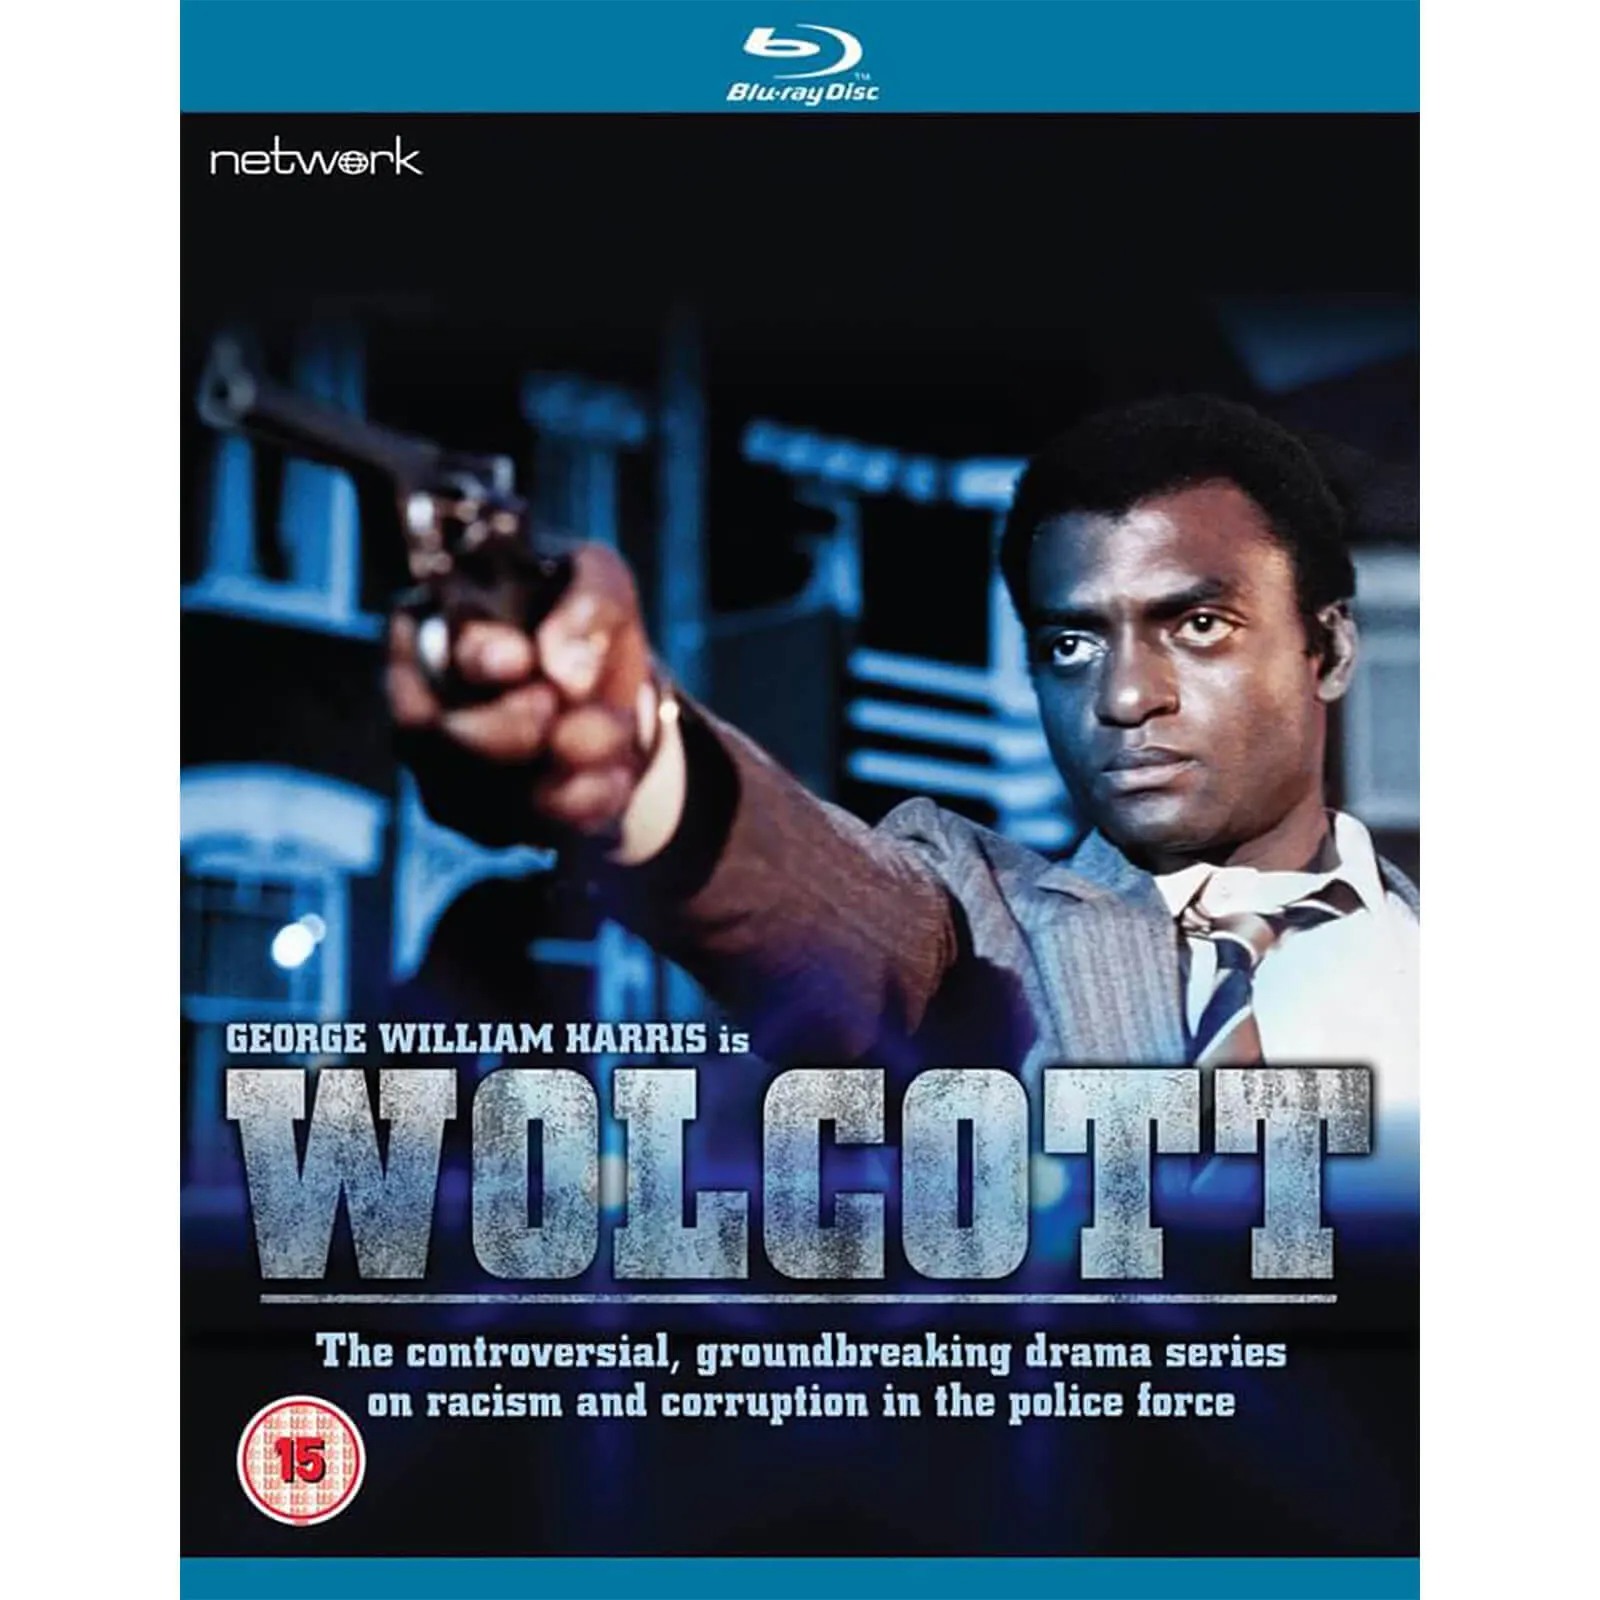 Wolcott: The Complete Series